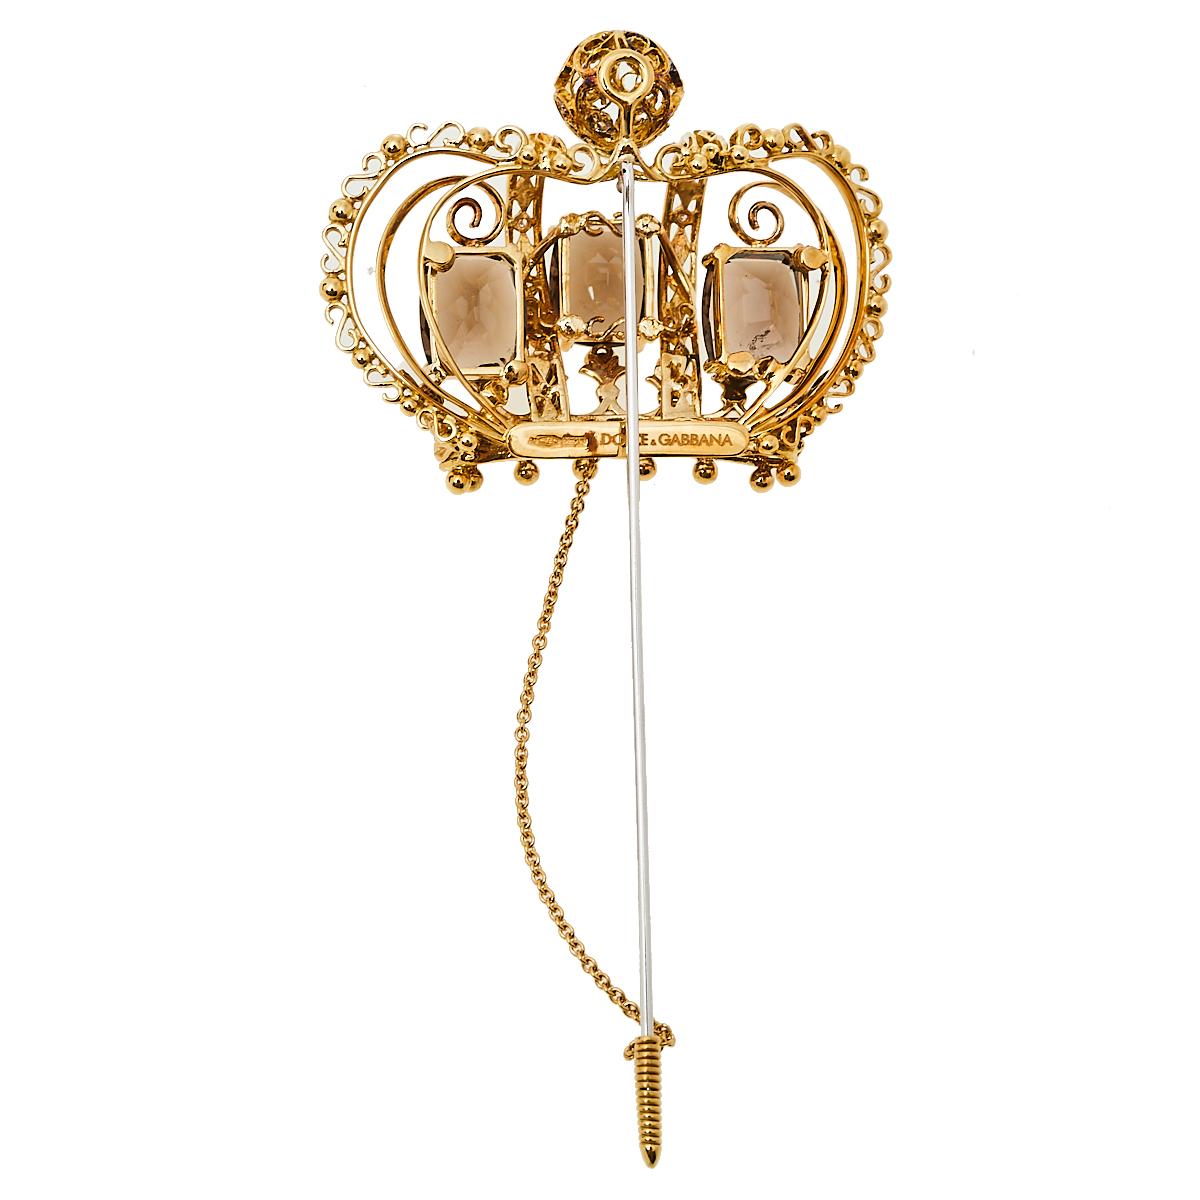 Dolce & Gabbana's collections are a testament to the label's opulent and glamorous aesthetics. This pin brooch is sculpted from 18K yellow gold into a crown motif, a symbol that is often seen on the label's collection. It is detailed with diamonds